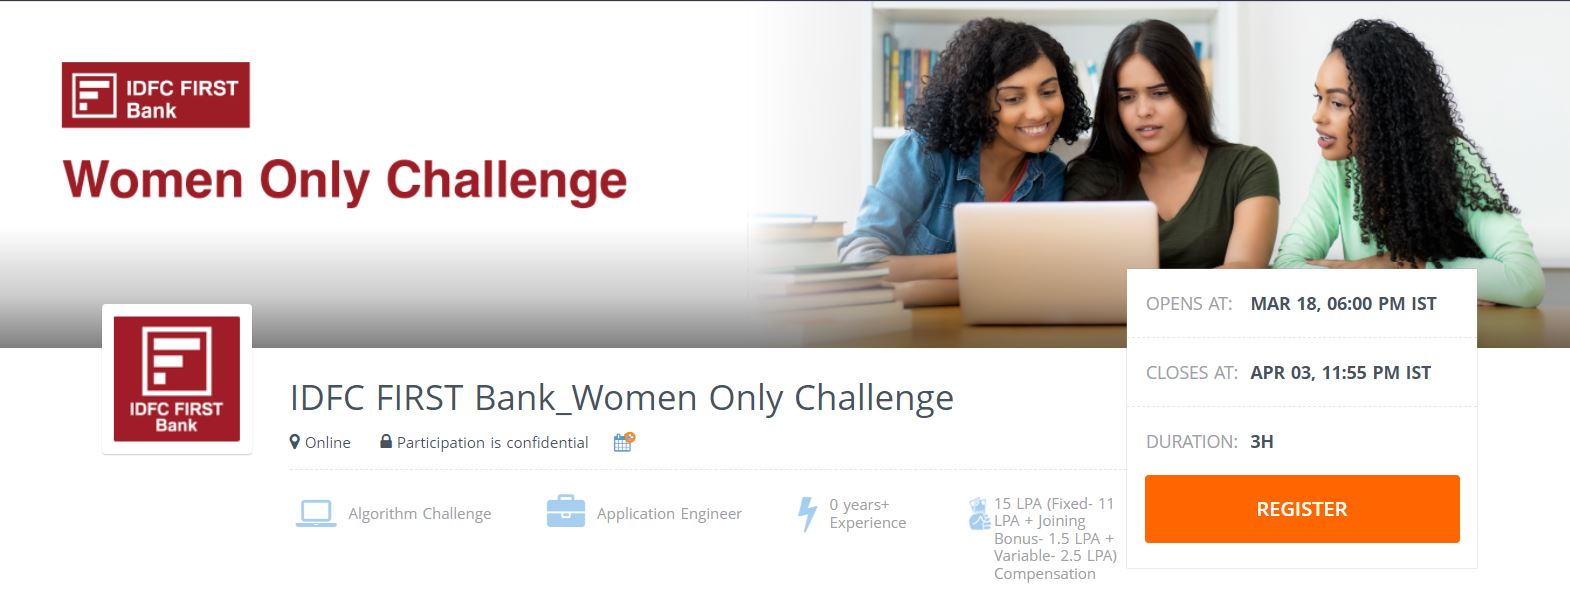 idfc-first-bank-women-only-challenge-prizes-worth-rs-3-l-register-by-april-3